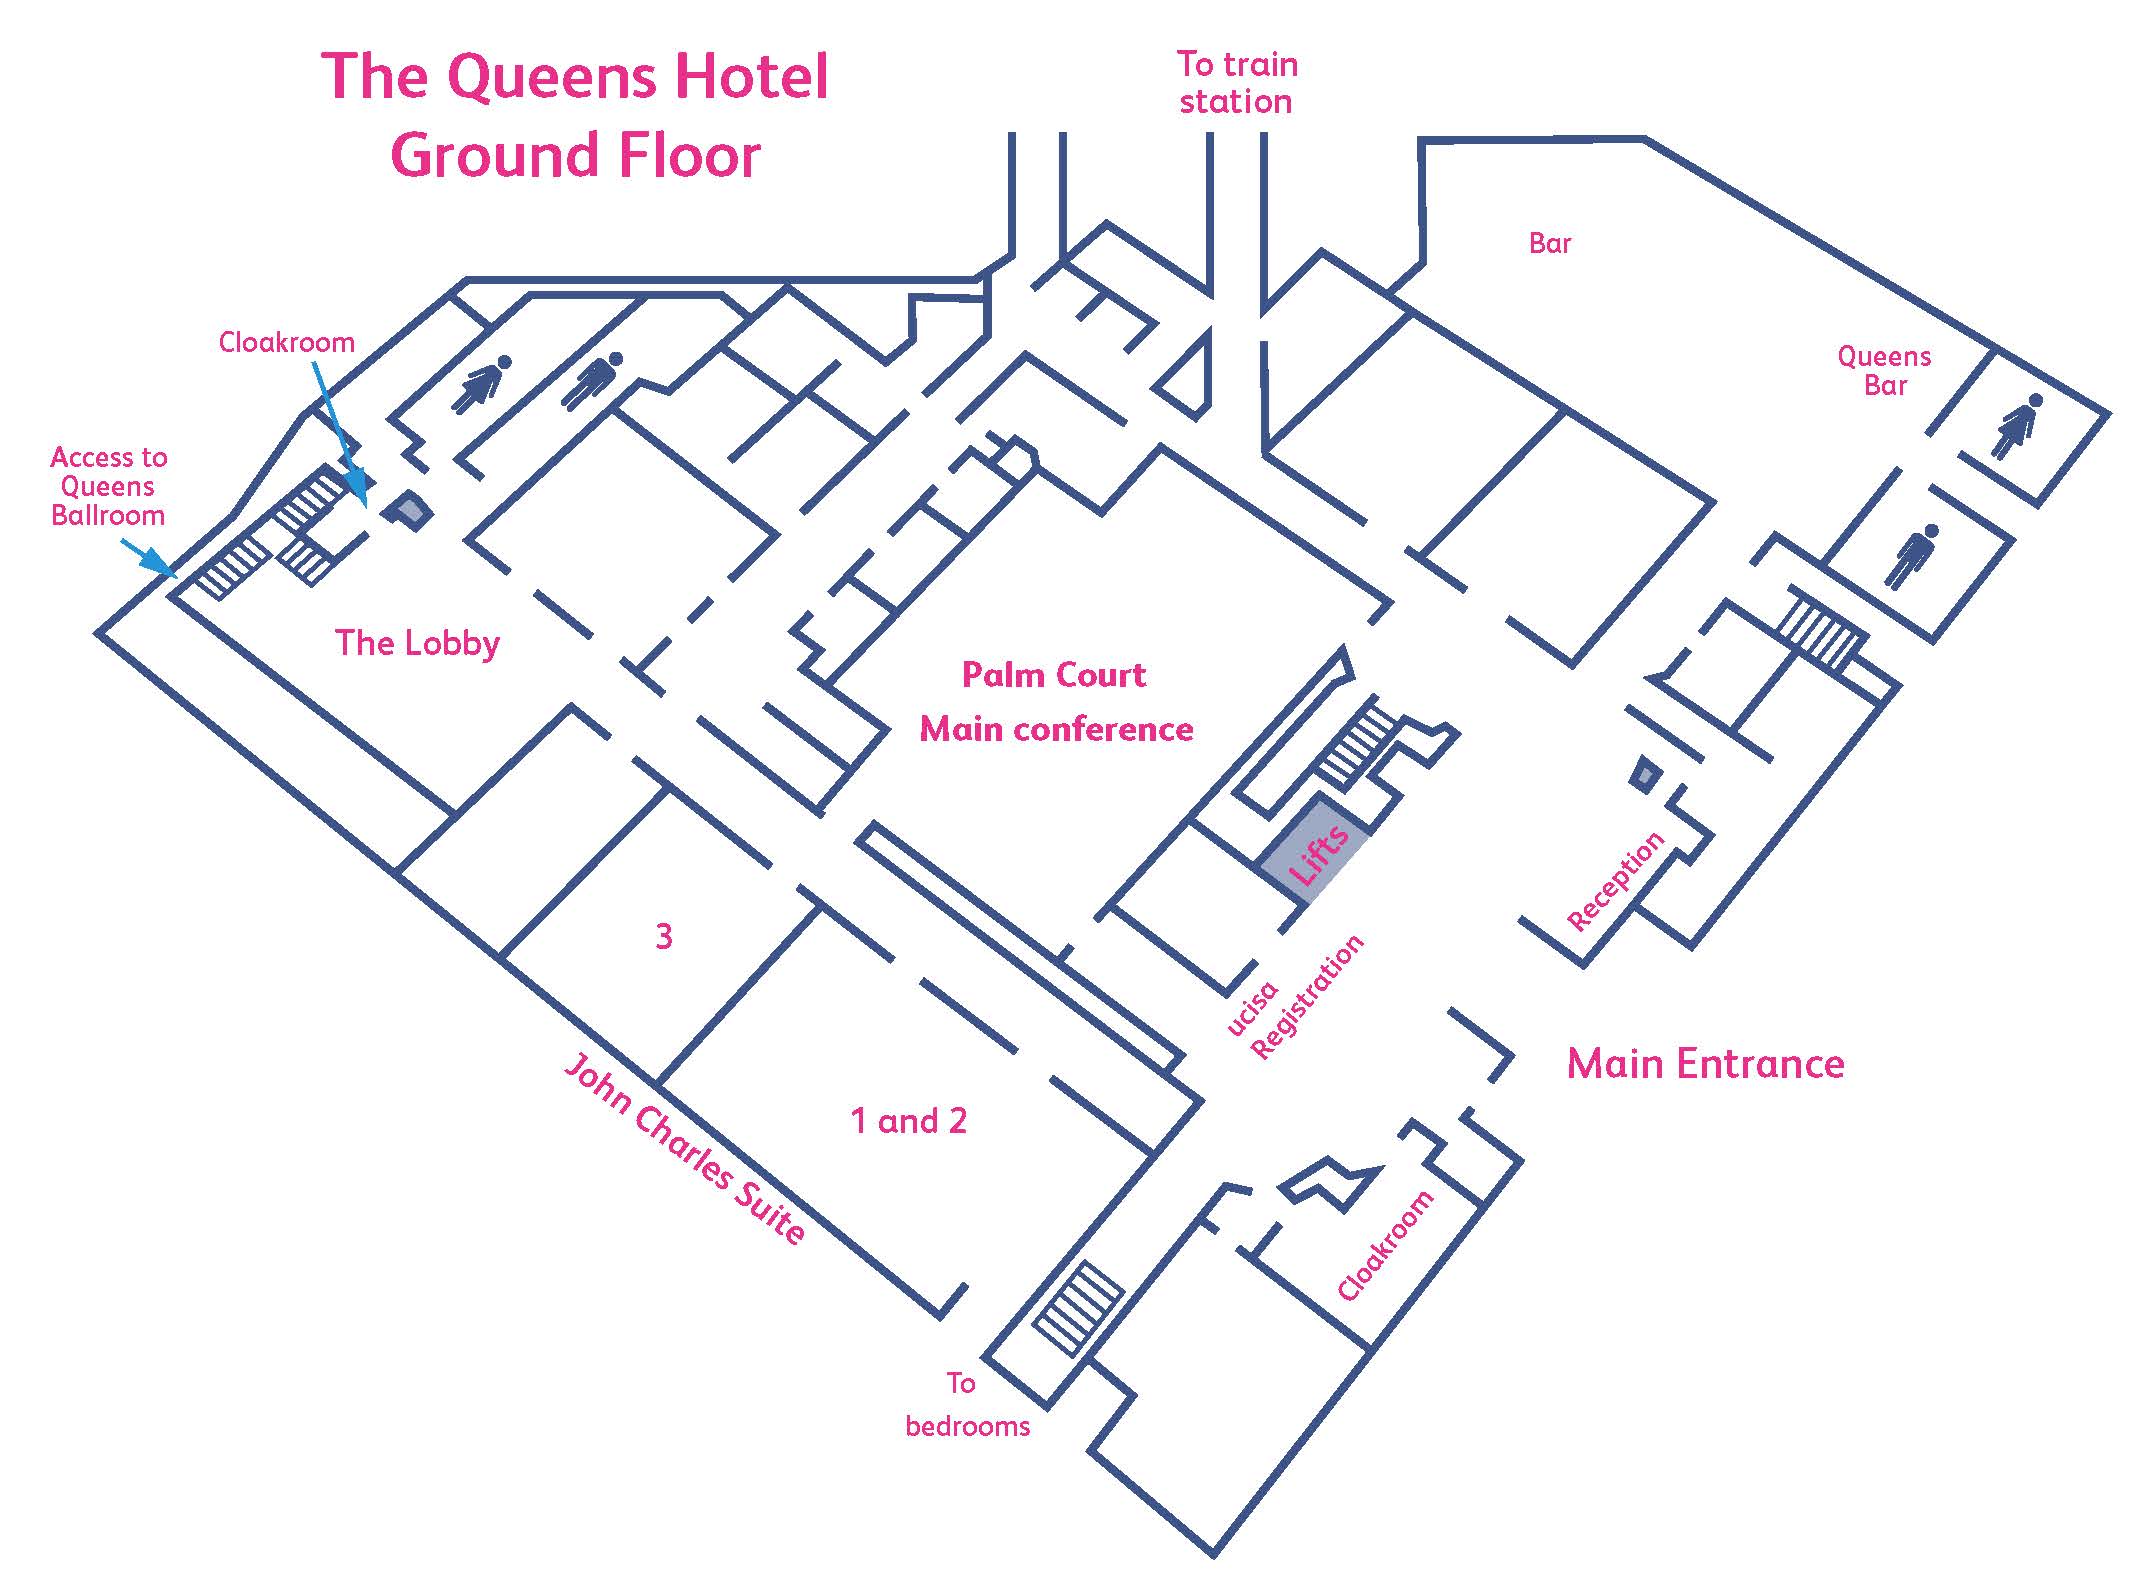 Ground floor layout of the The Queens hotel